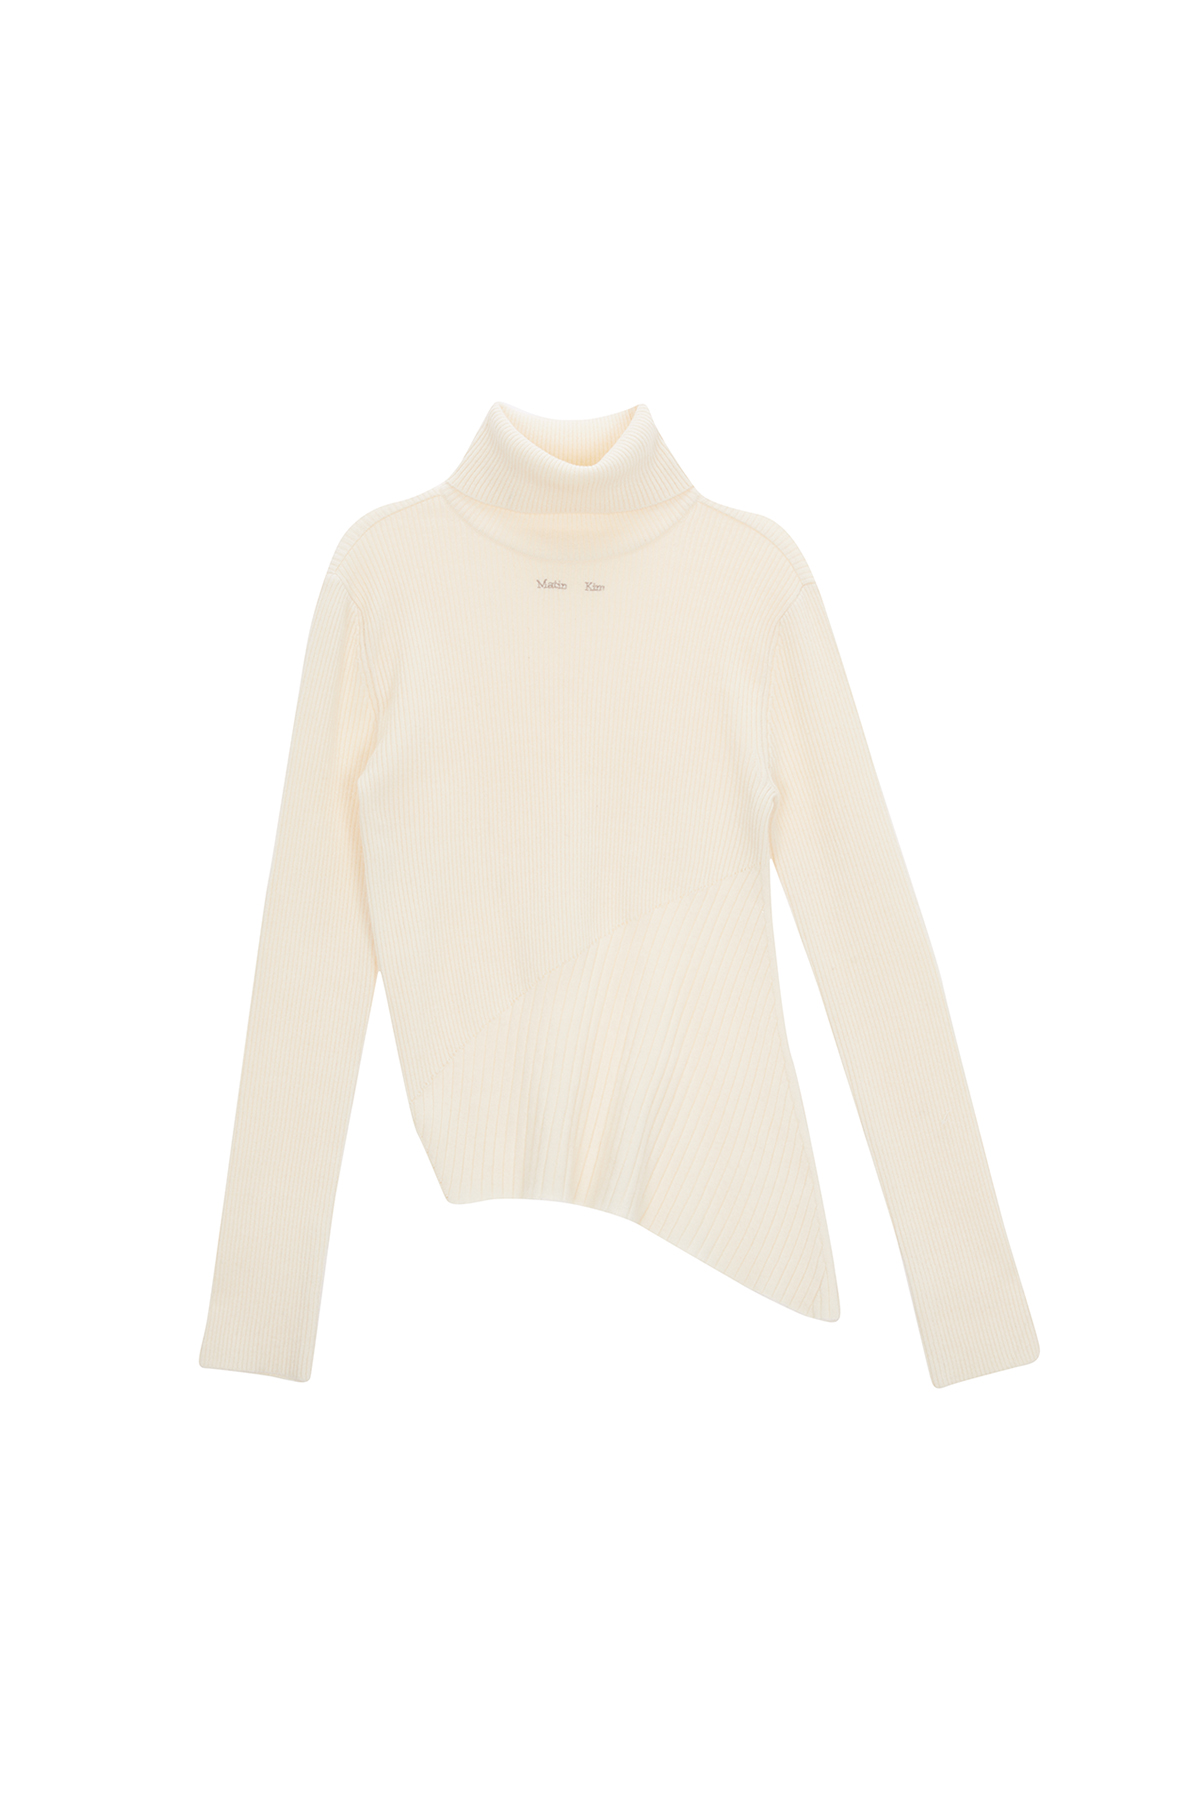 TURTLE NECK UNBALANCE KNIT PULLOVER IN IVORY